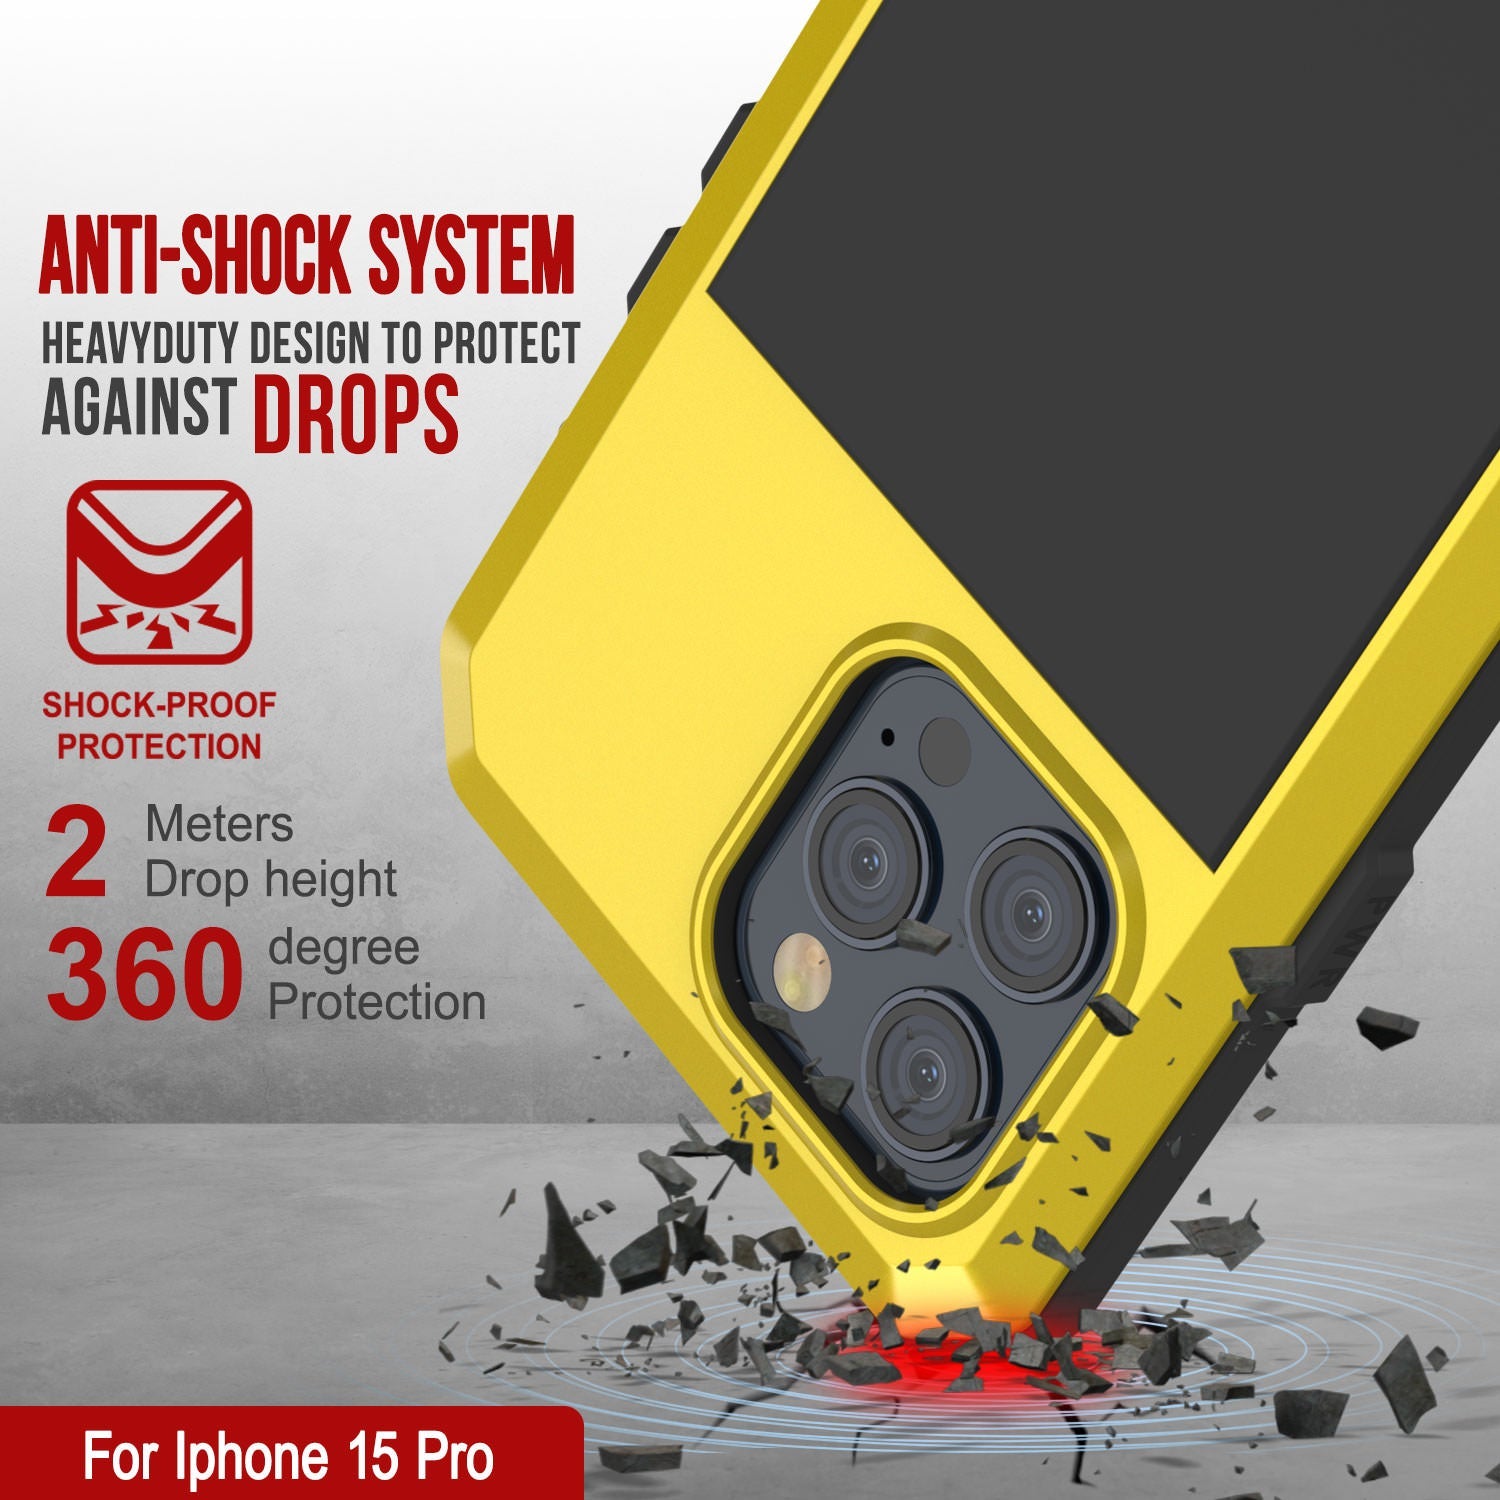 iPhone 15 Pro Metal Case, Heavy Duty Military Grade Armor Cover [shock proof] Full Body Hard [Yellow]